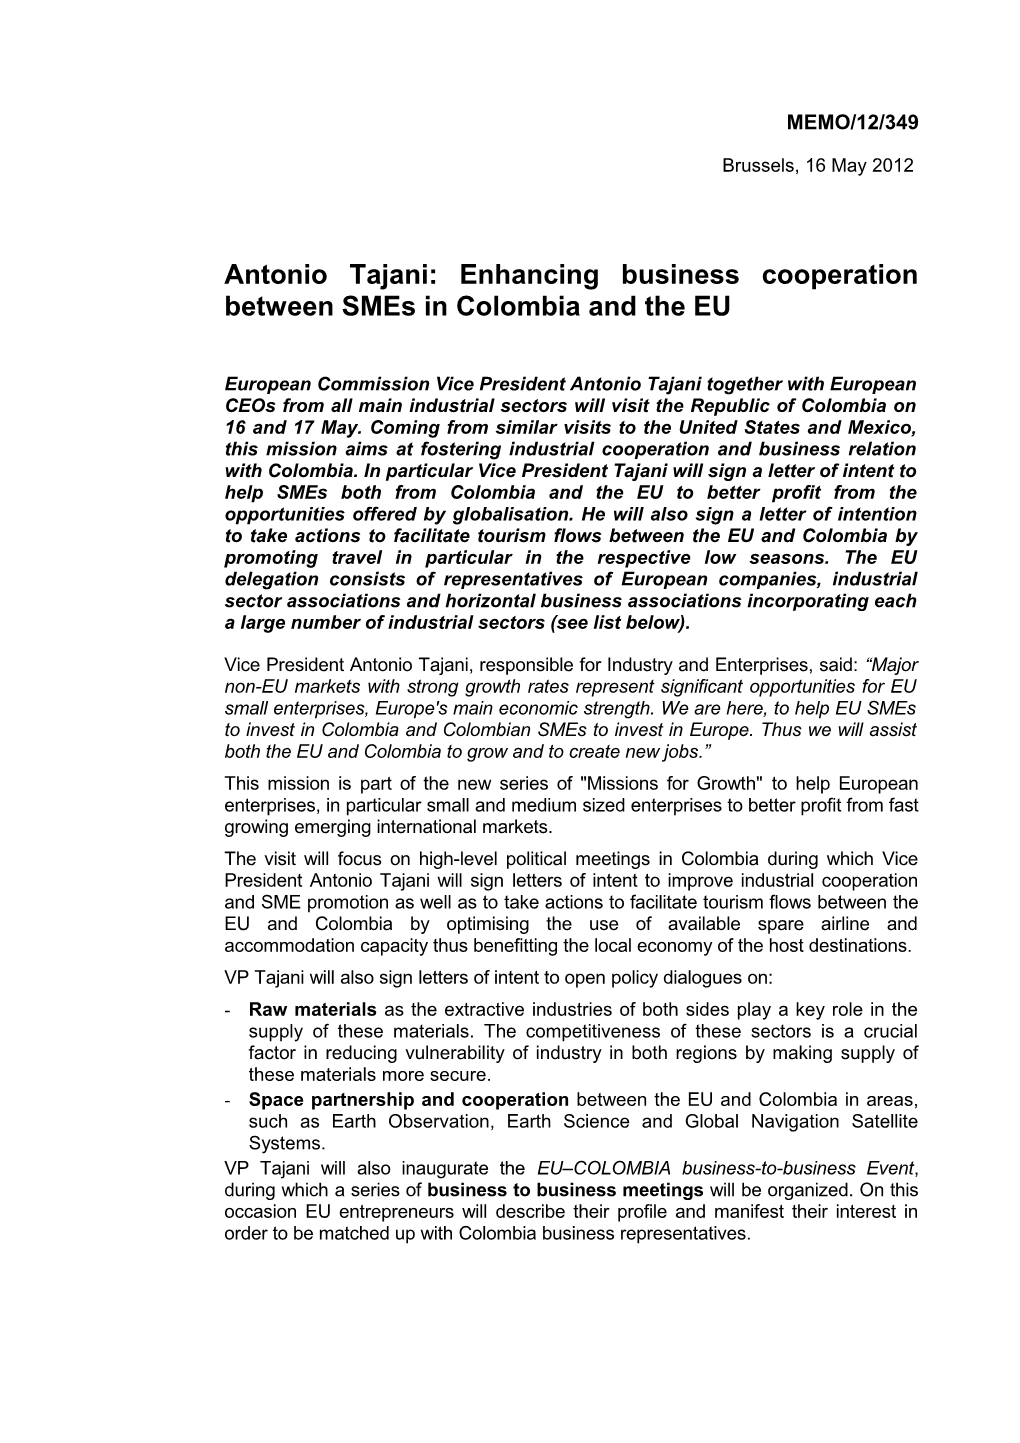 Antonio Tajani: Enhancing Business Cooperation Between Smes in Colombia and the EU